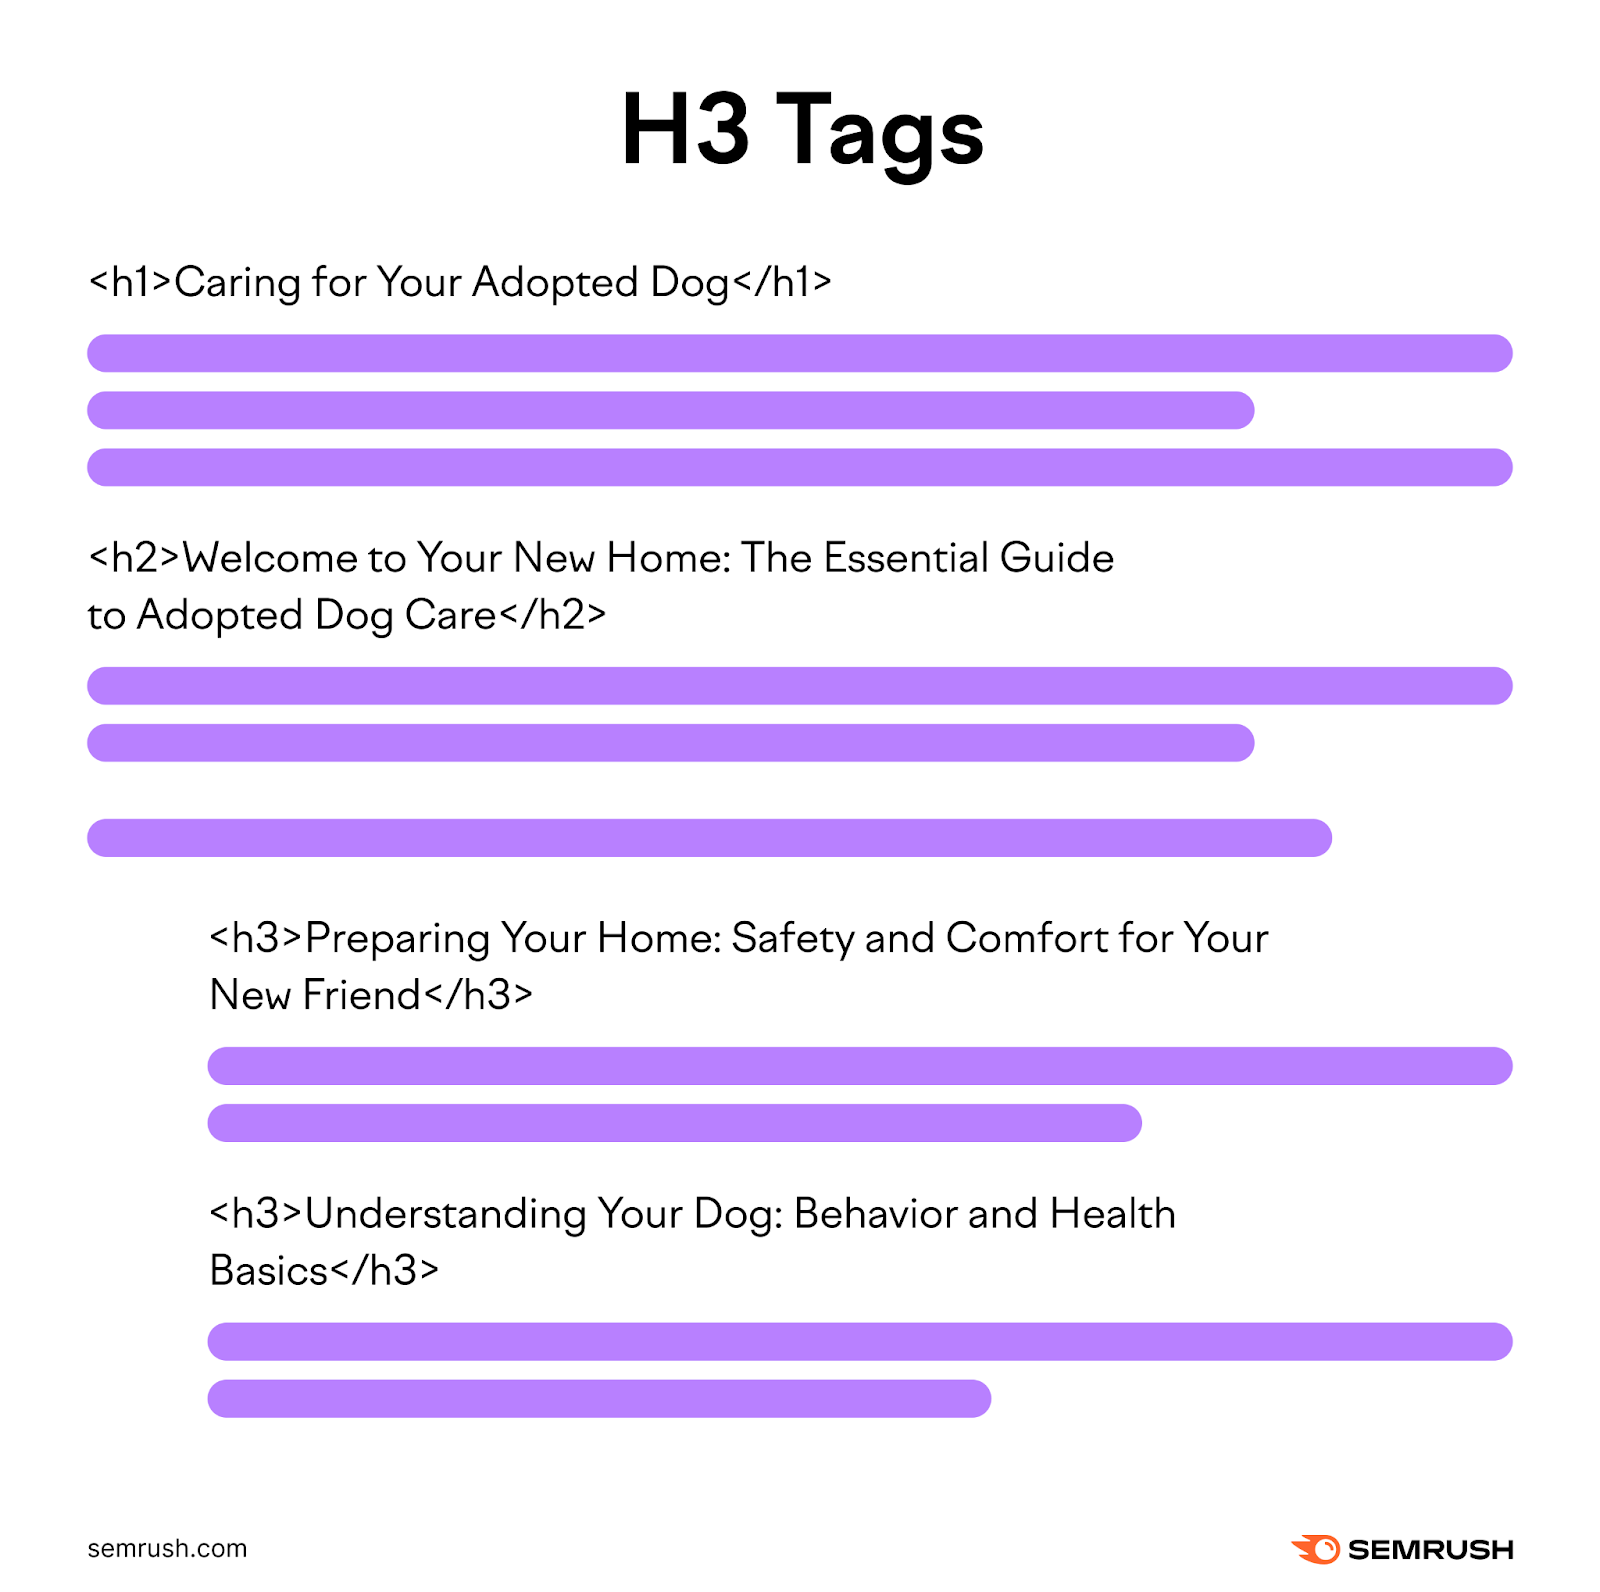 two h3 header tags added beneath the h2 about welcoming home your adopted . the h3 tags cover preparing your home and understanding  behavior